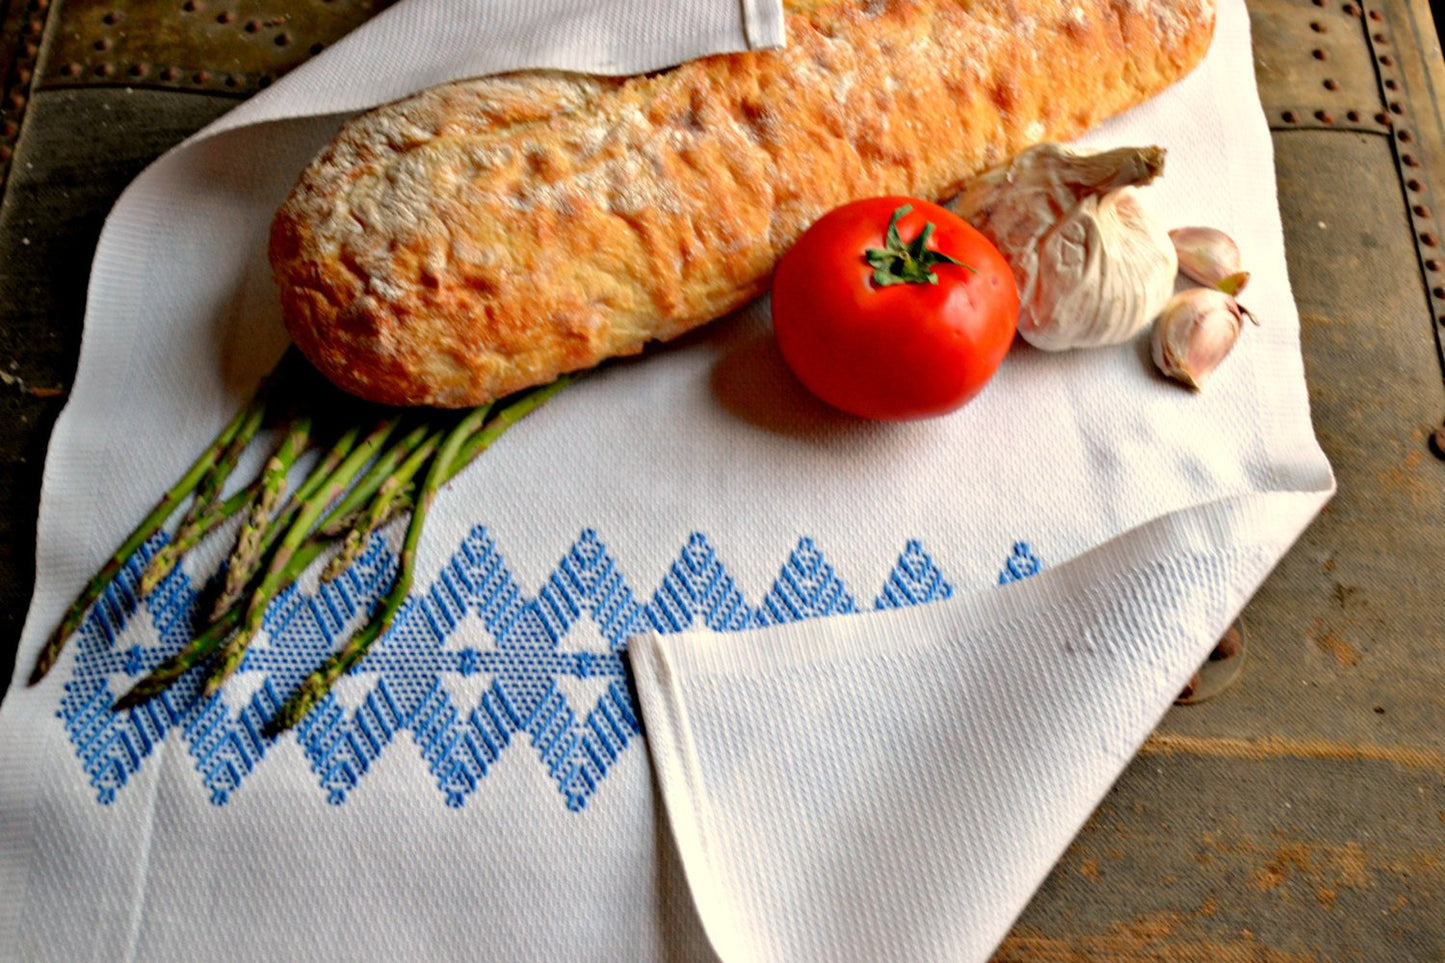 White tea towel embroidered in blue showing back of work as well as bread and veggies